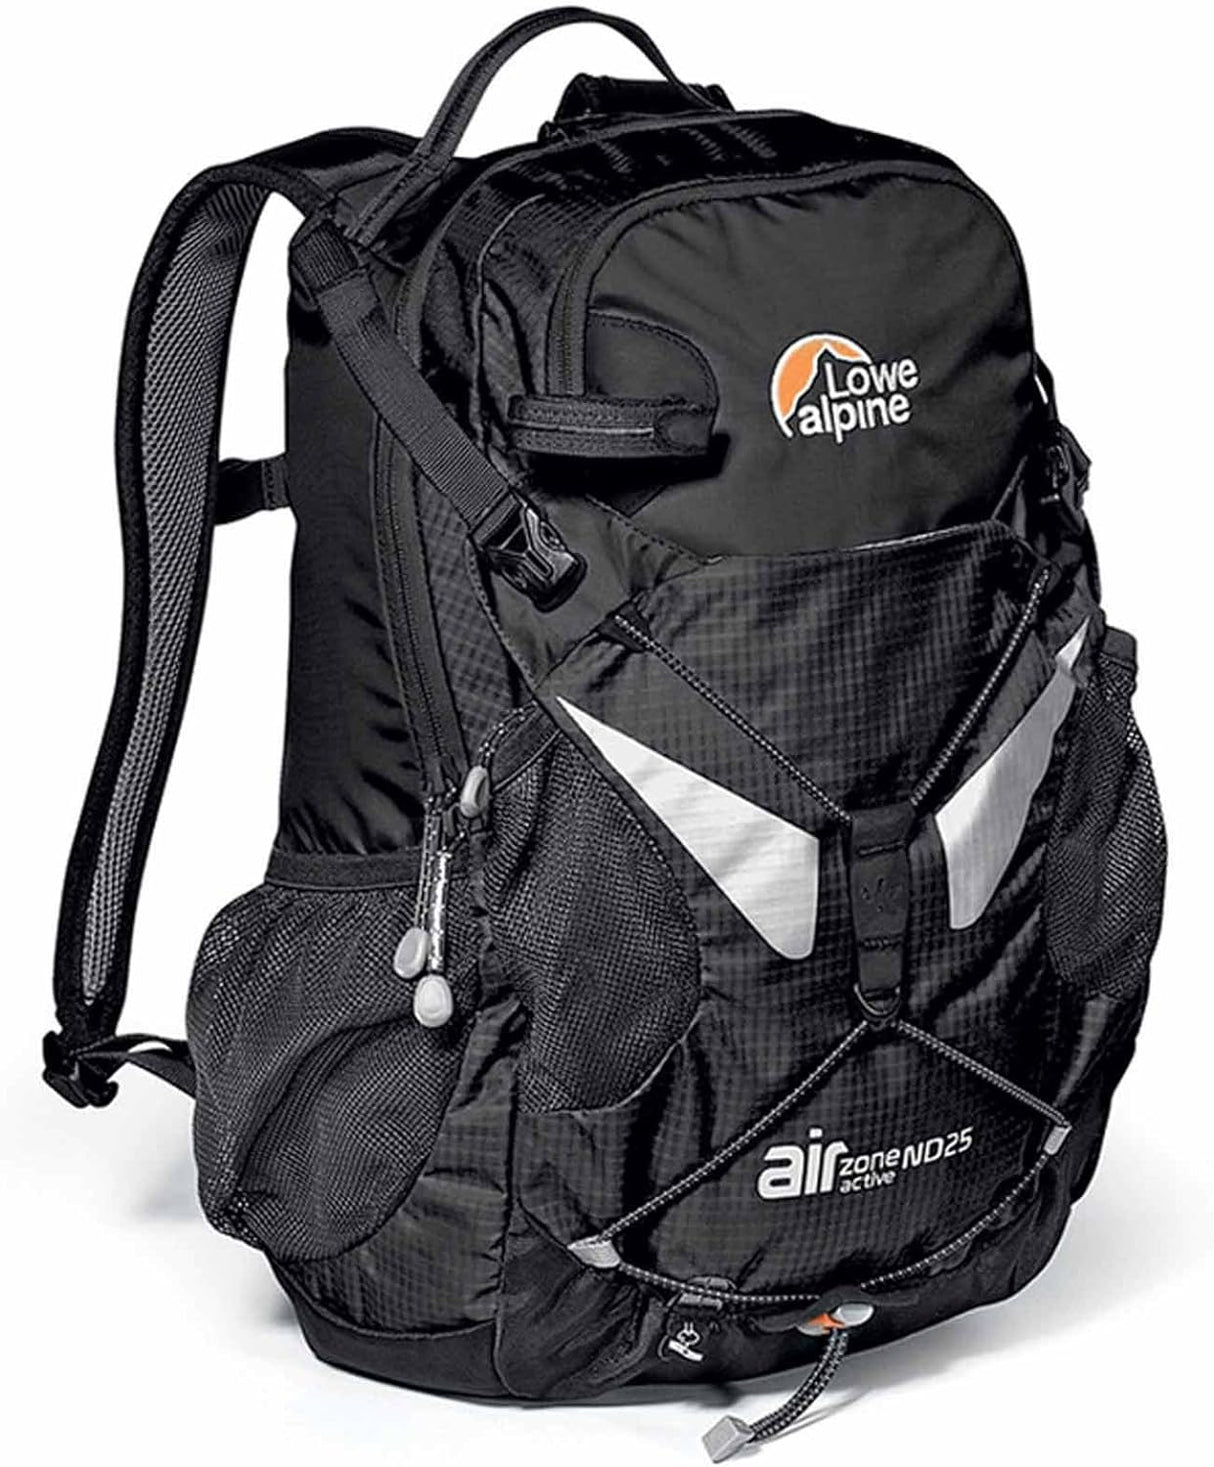 Airzone Active Nd25L